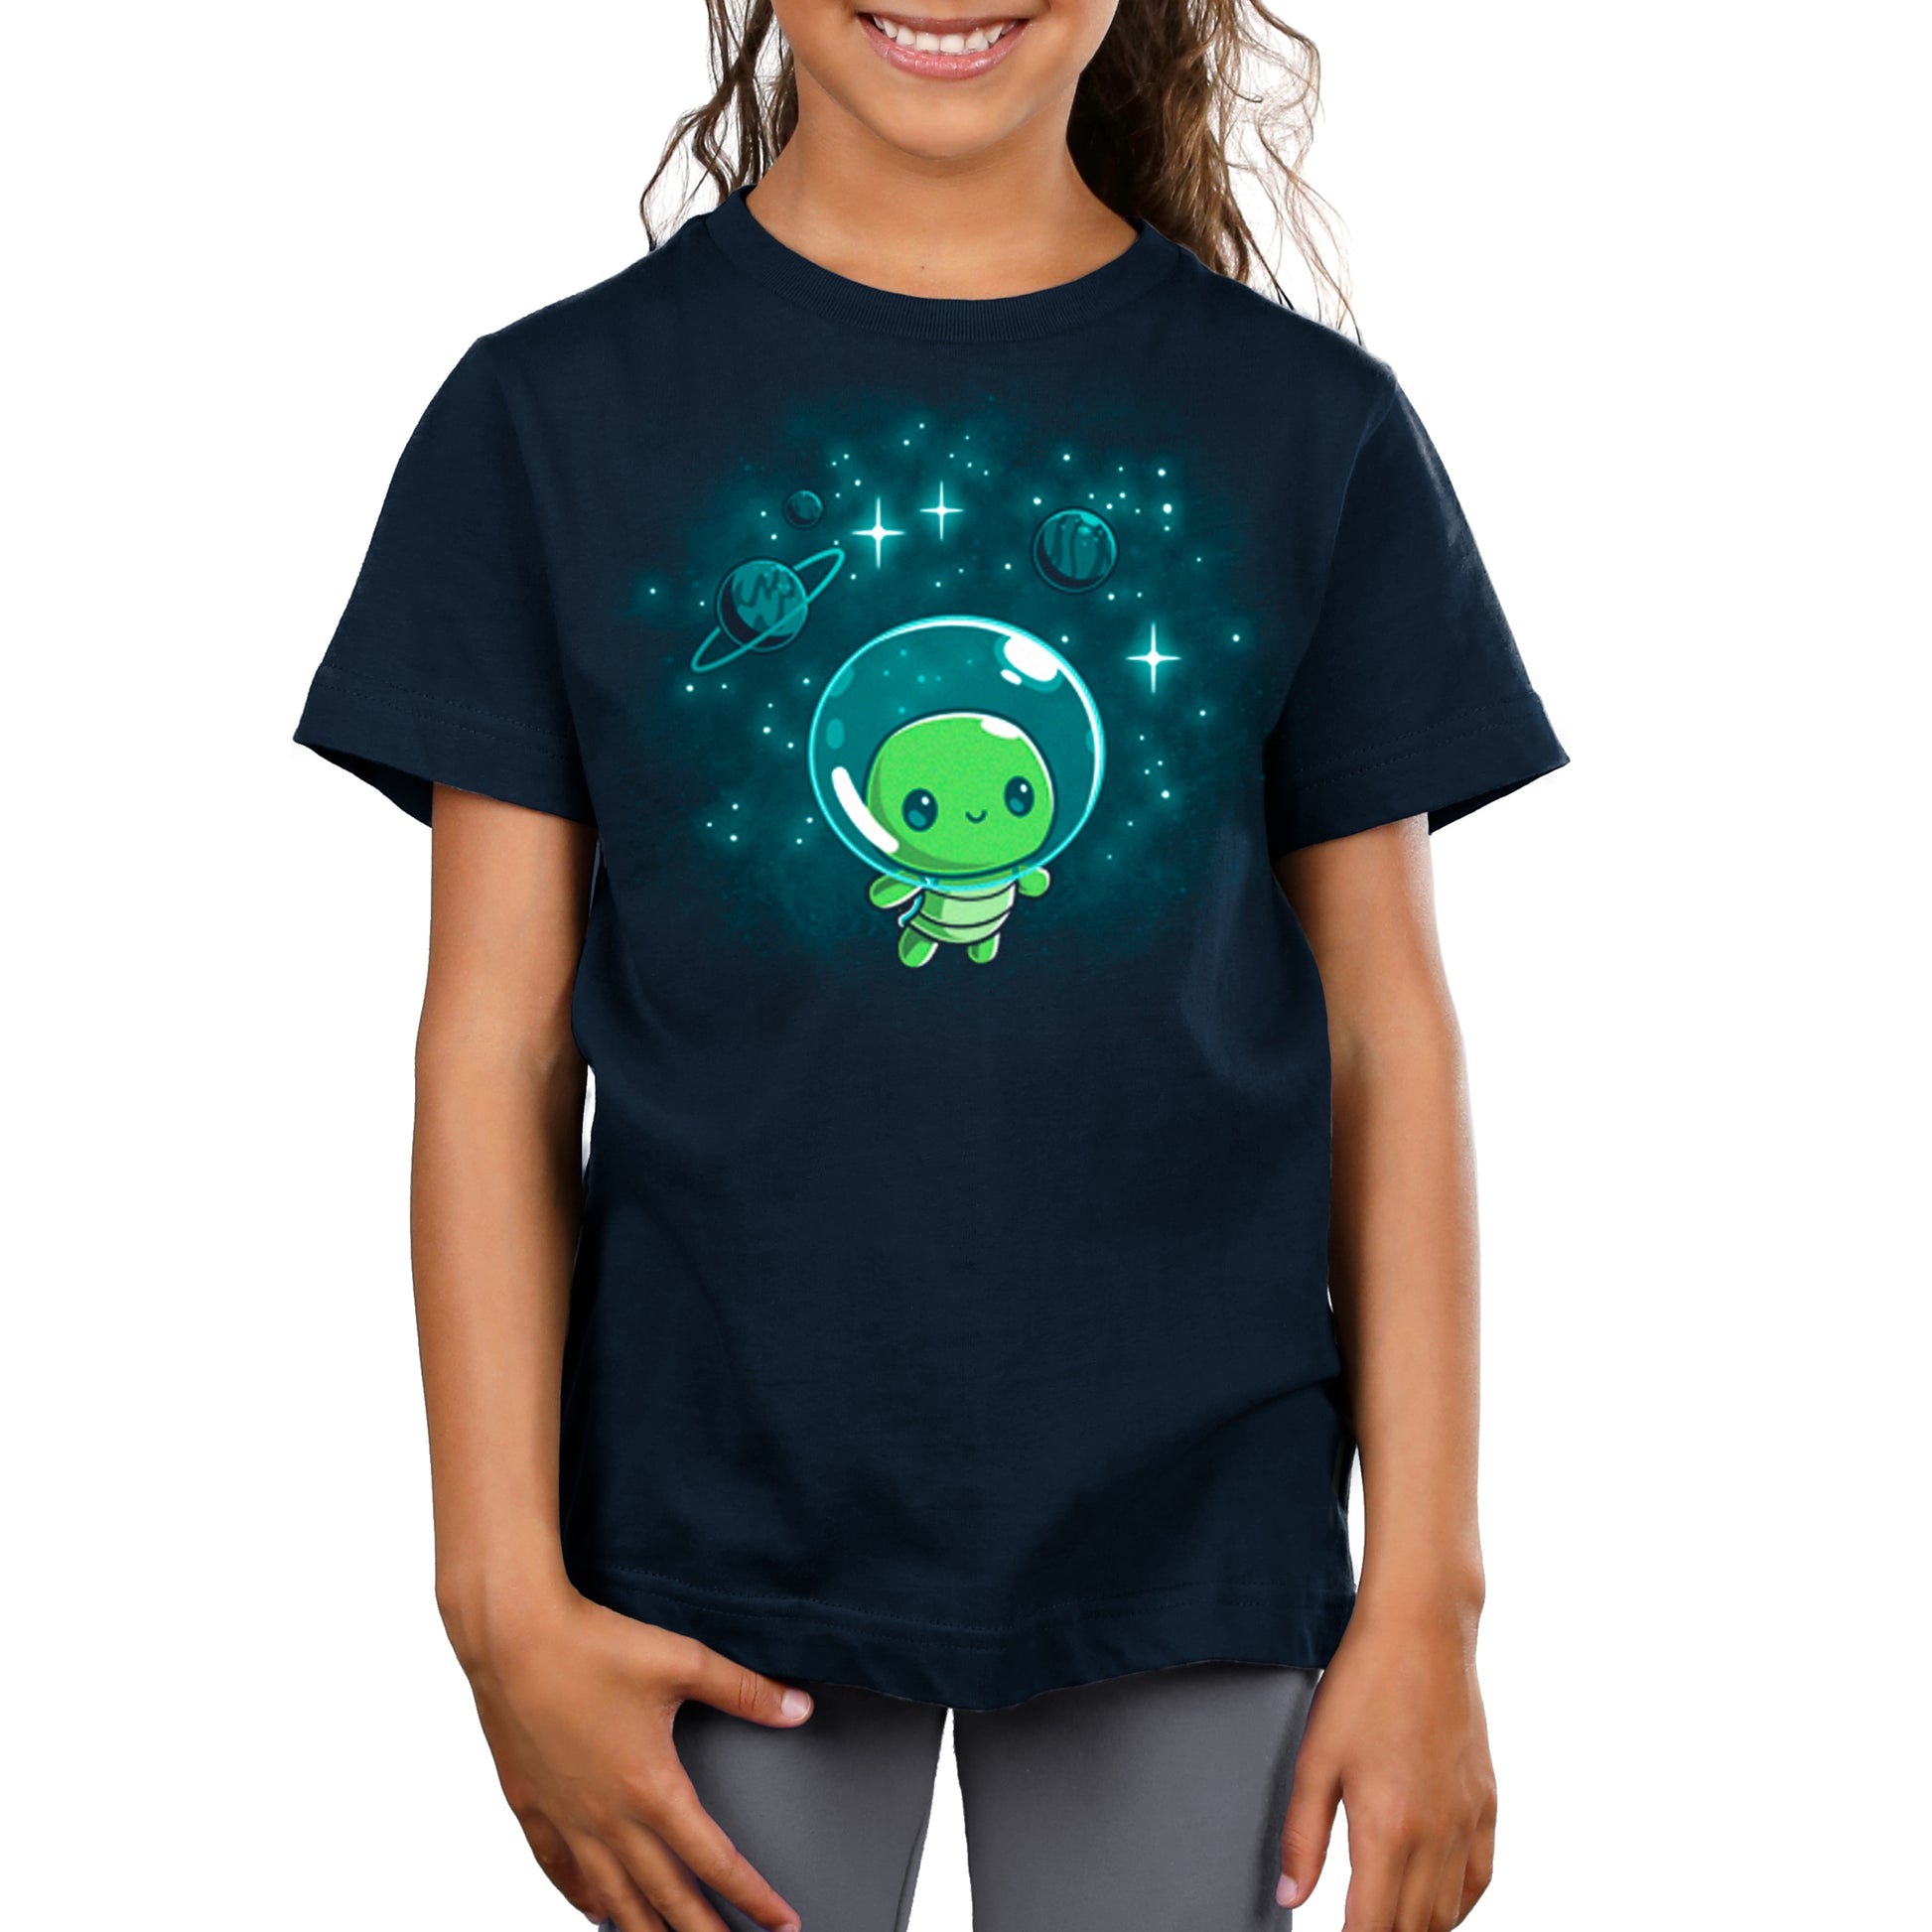 A girl wearing a TeeTurtle Galactic Turtle t-shirt with a green alien in space.